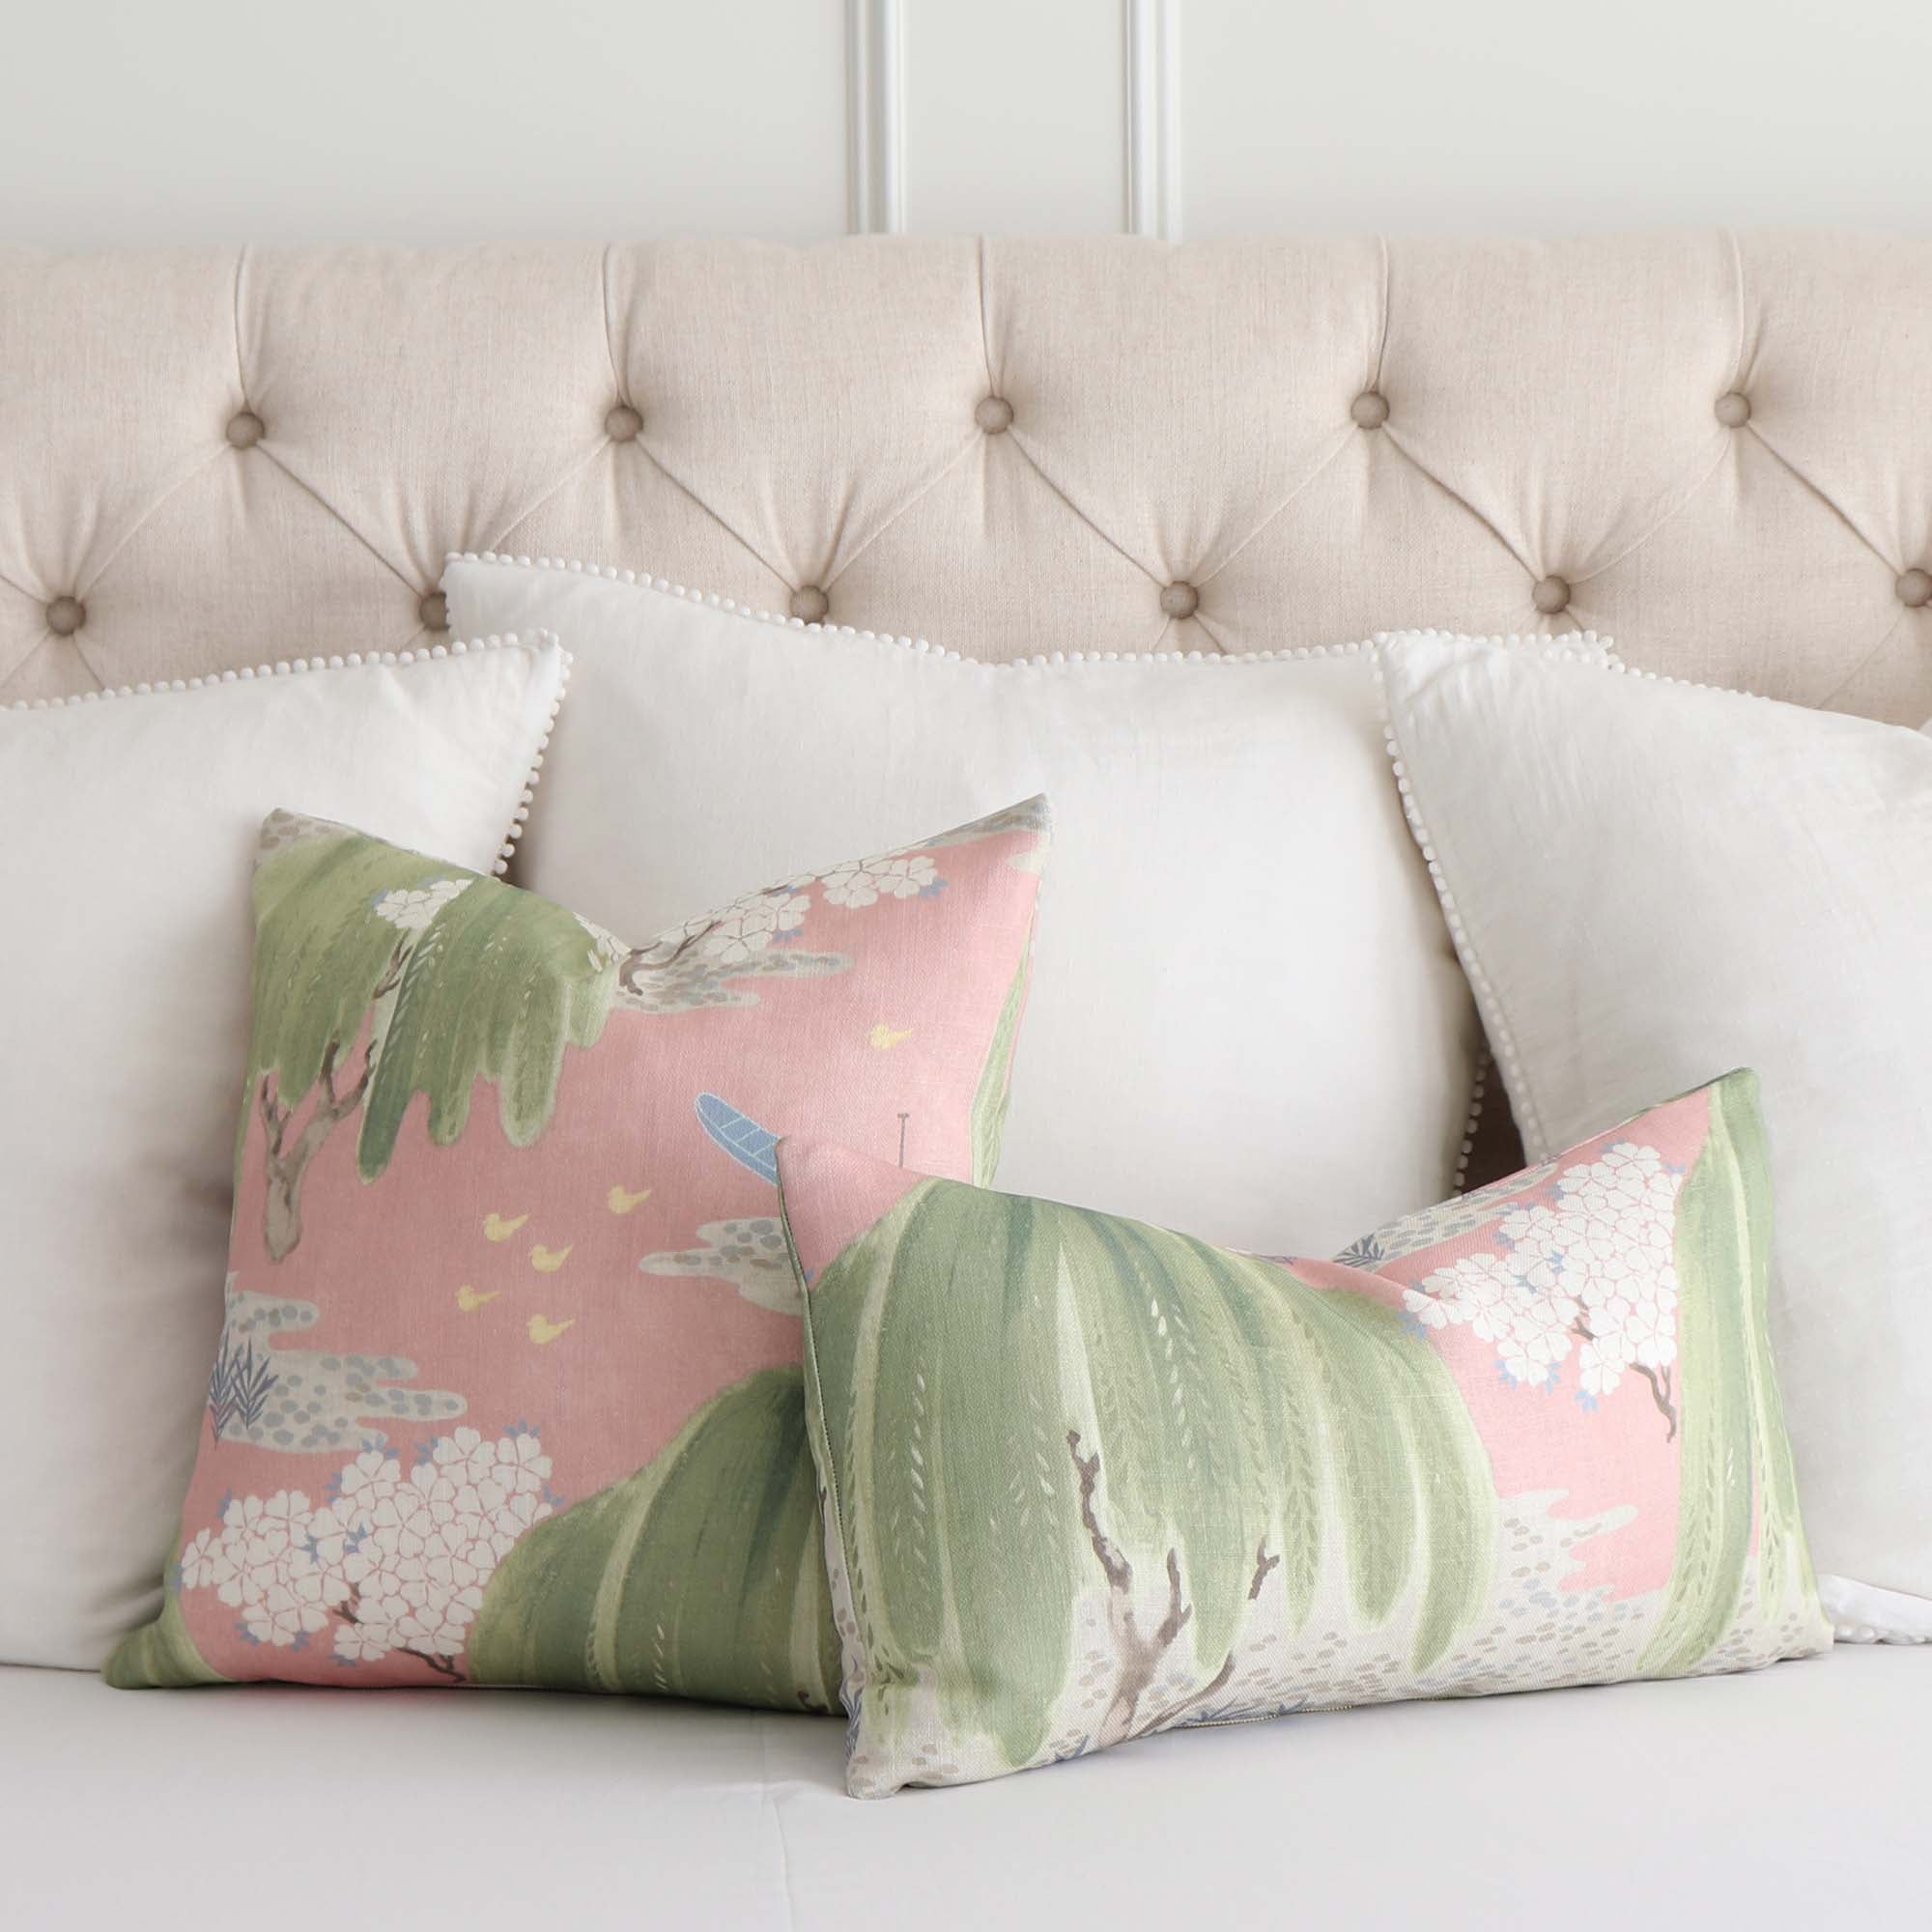 Thibaut Willow Tree Blush Pink Chinoiserie Printed Floral Decorative Throw Pillow Cover on Bed with Large White Euro Shams